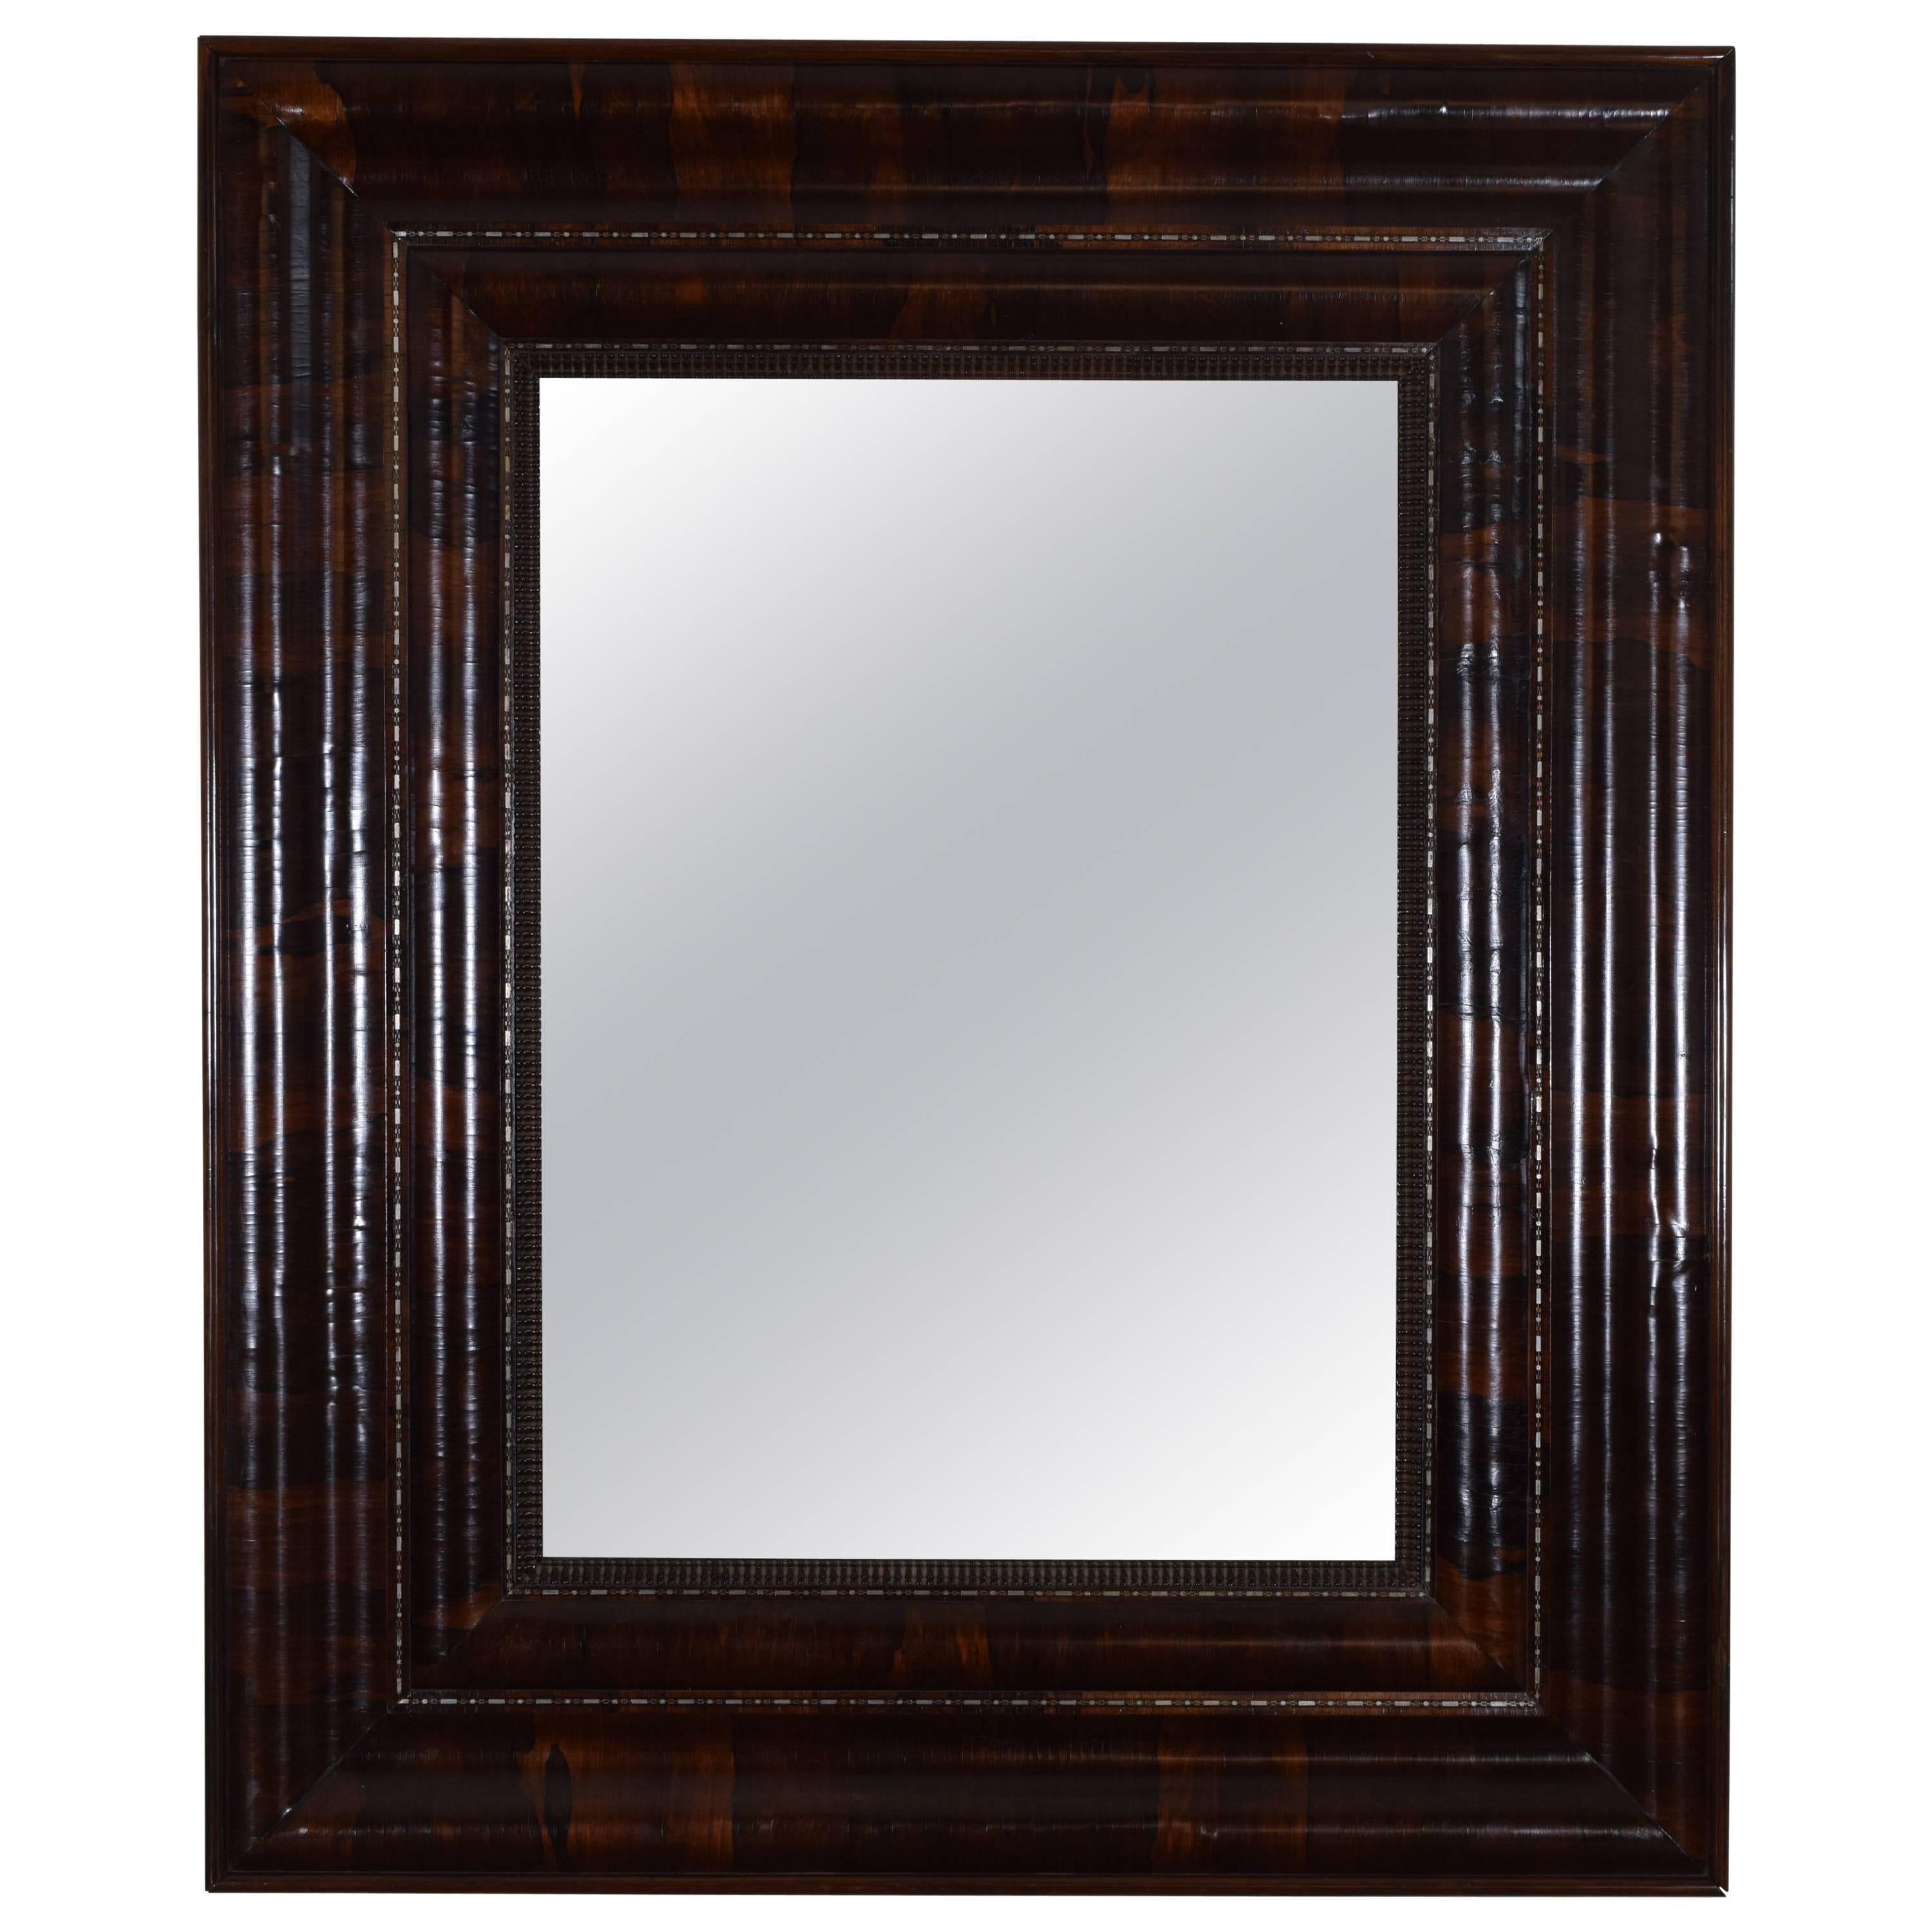 Large Spanish Baroque Revival Rosewood and Metal Inlaid Mirror, Mid-19th Century